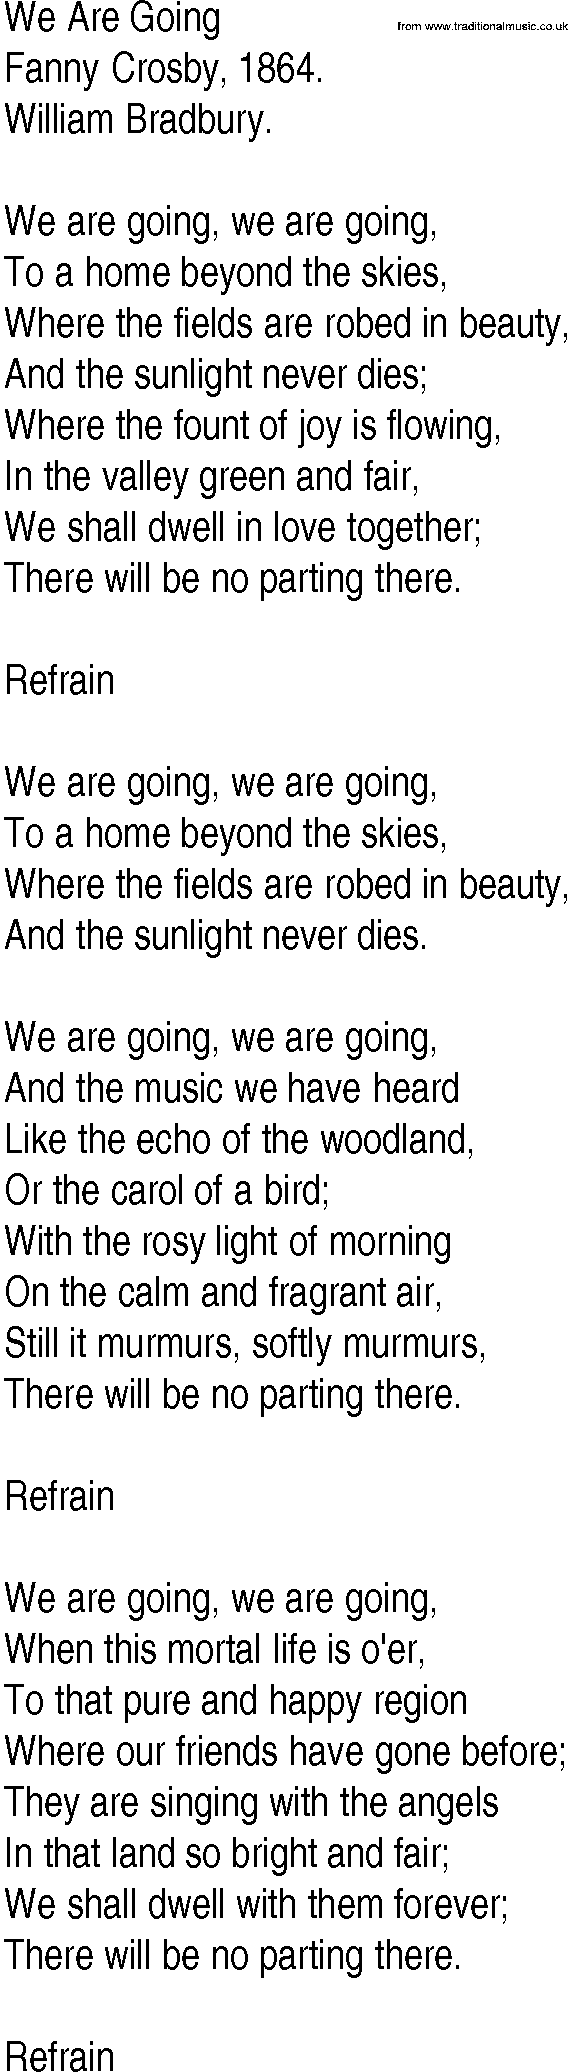 Hymn and Gospel Song: We Are Going by Fanny Crosby lyrics